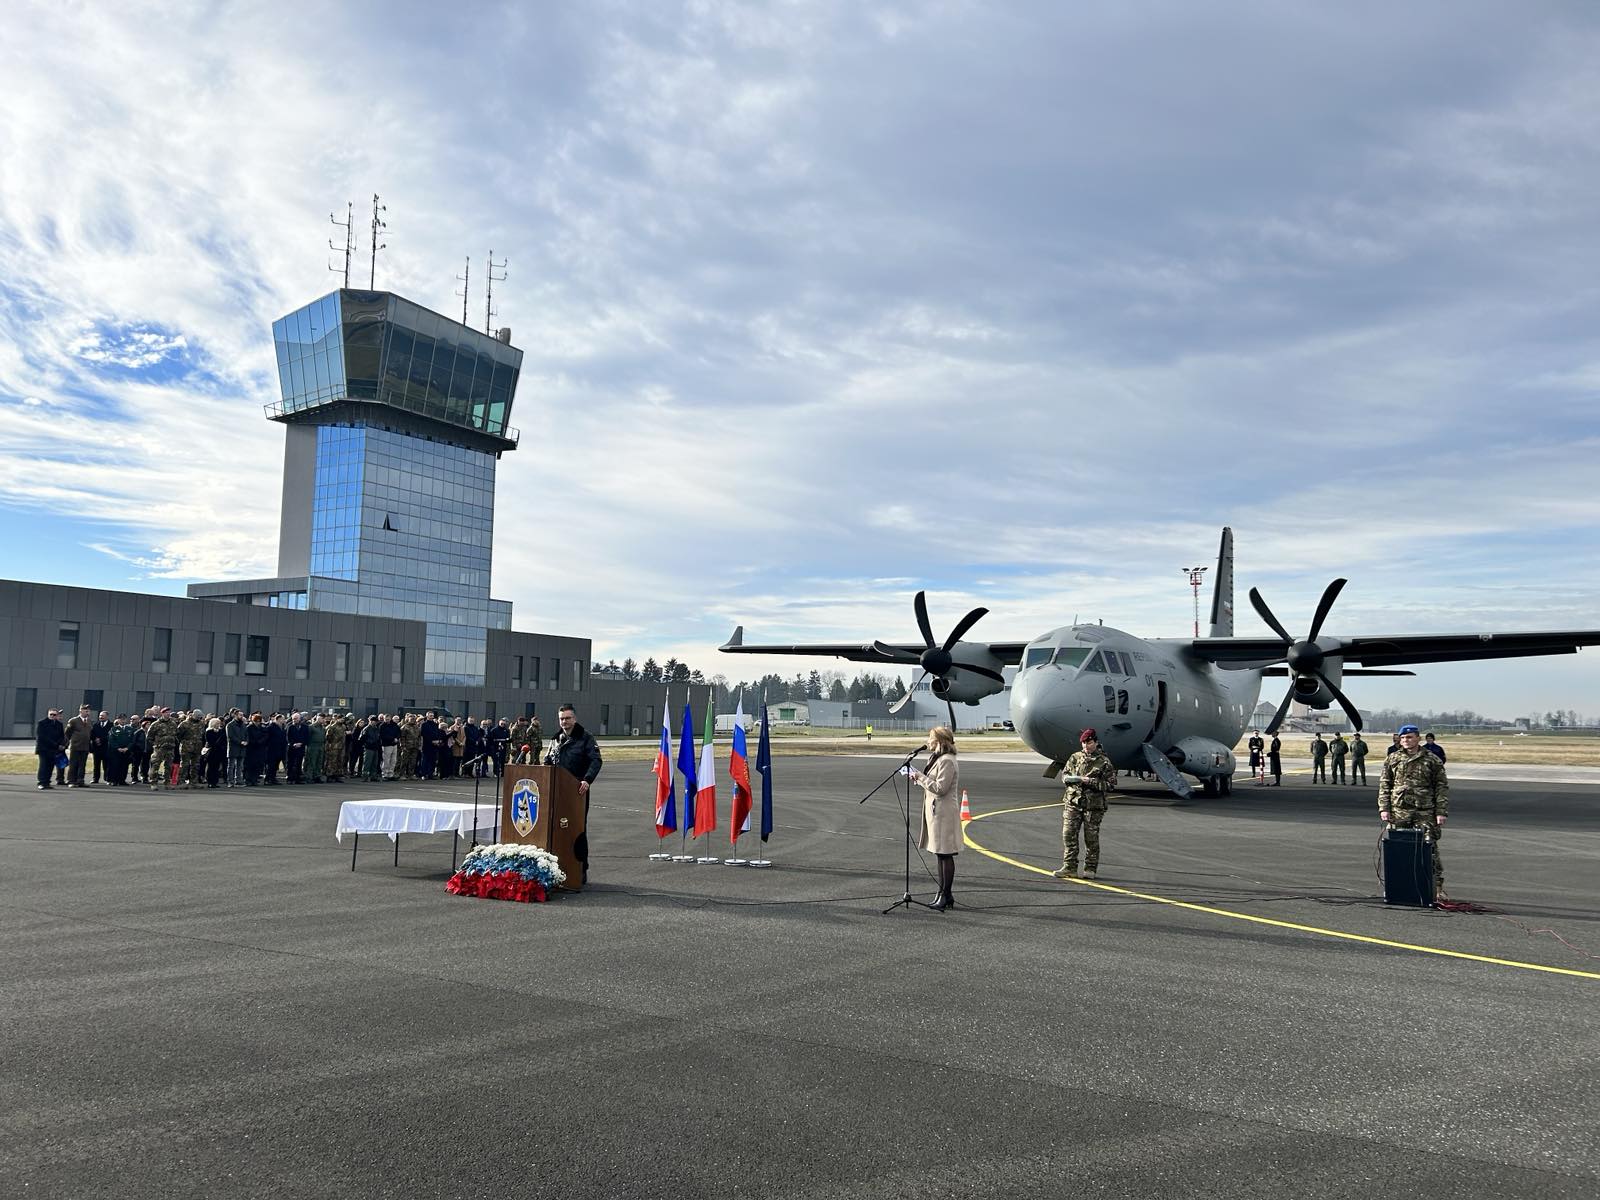 Slovenian defense officials and military personnel accept first C-27J Spartan aircraft at the Cerklje ob Krki airfield in Brežice